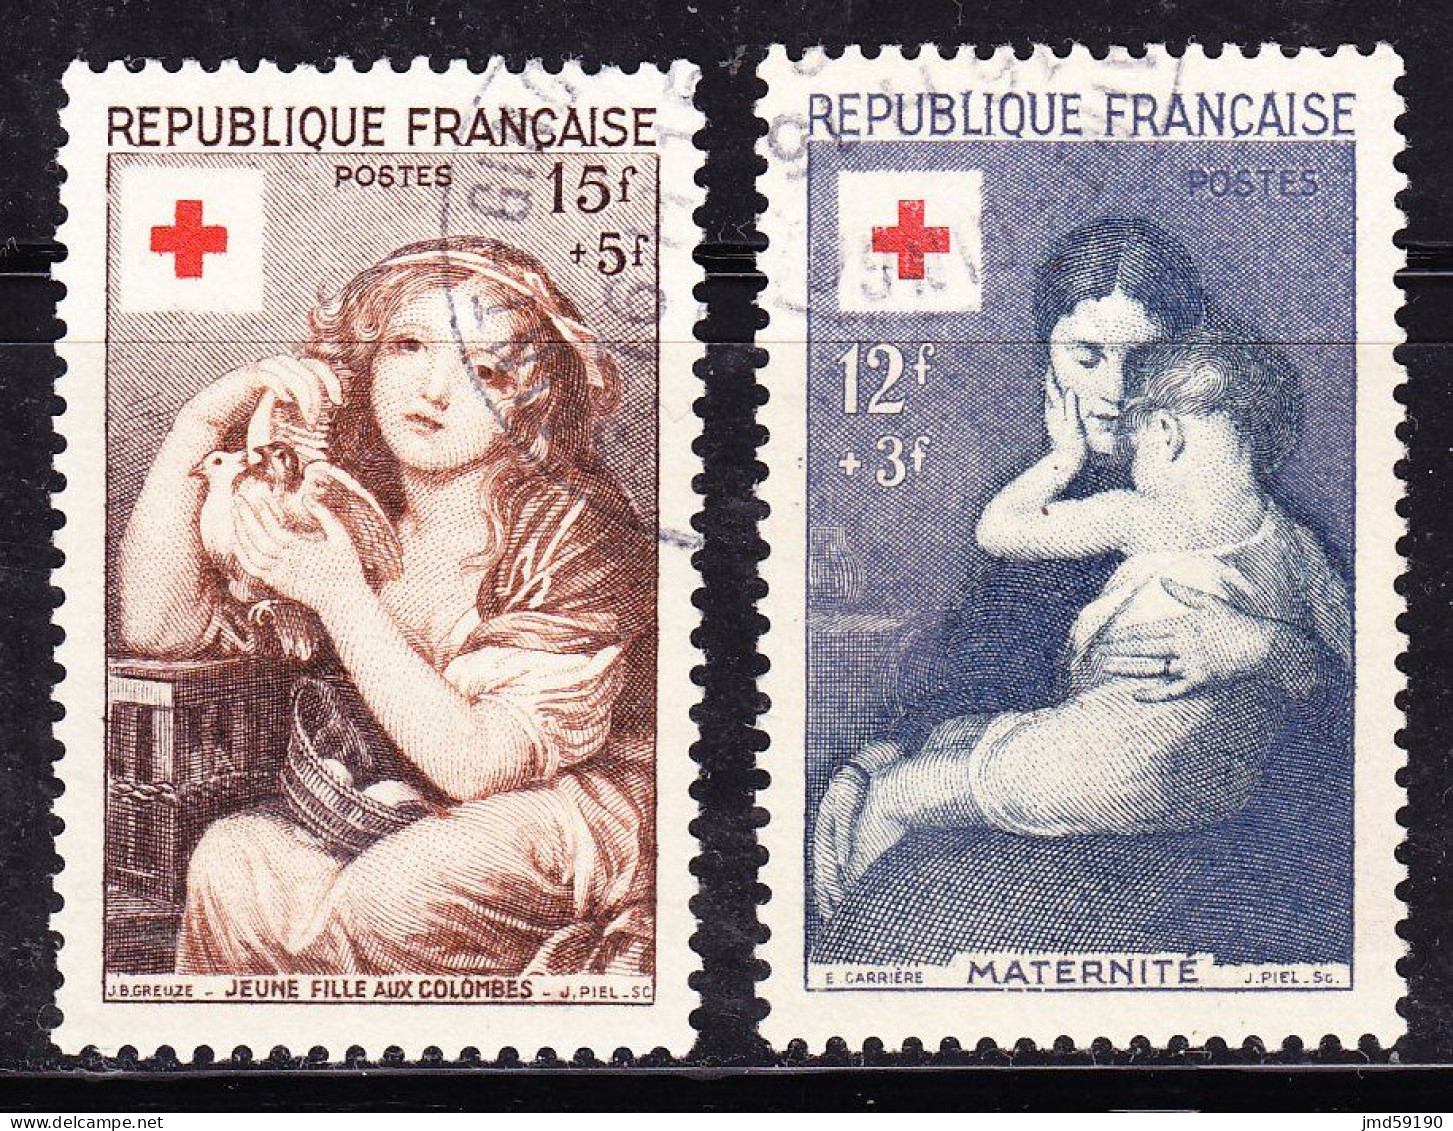 FRANCE Timbre Oblitéré N° 1006-1007 - Croix Rouge 1954 - Used Stamps